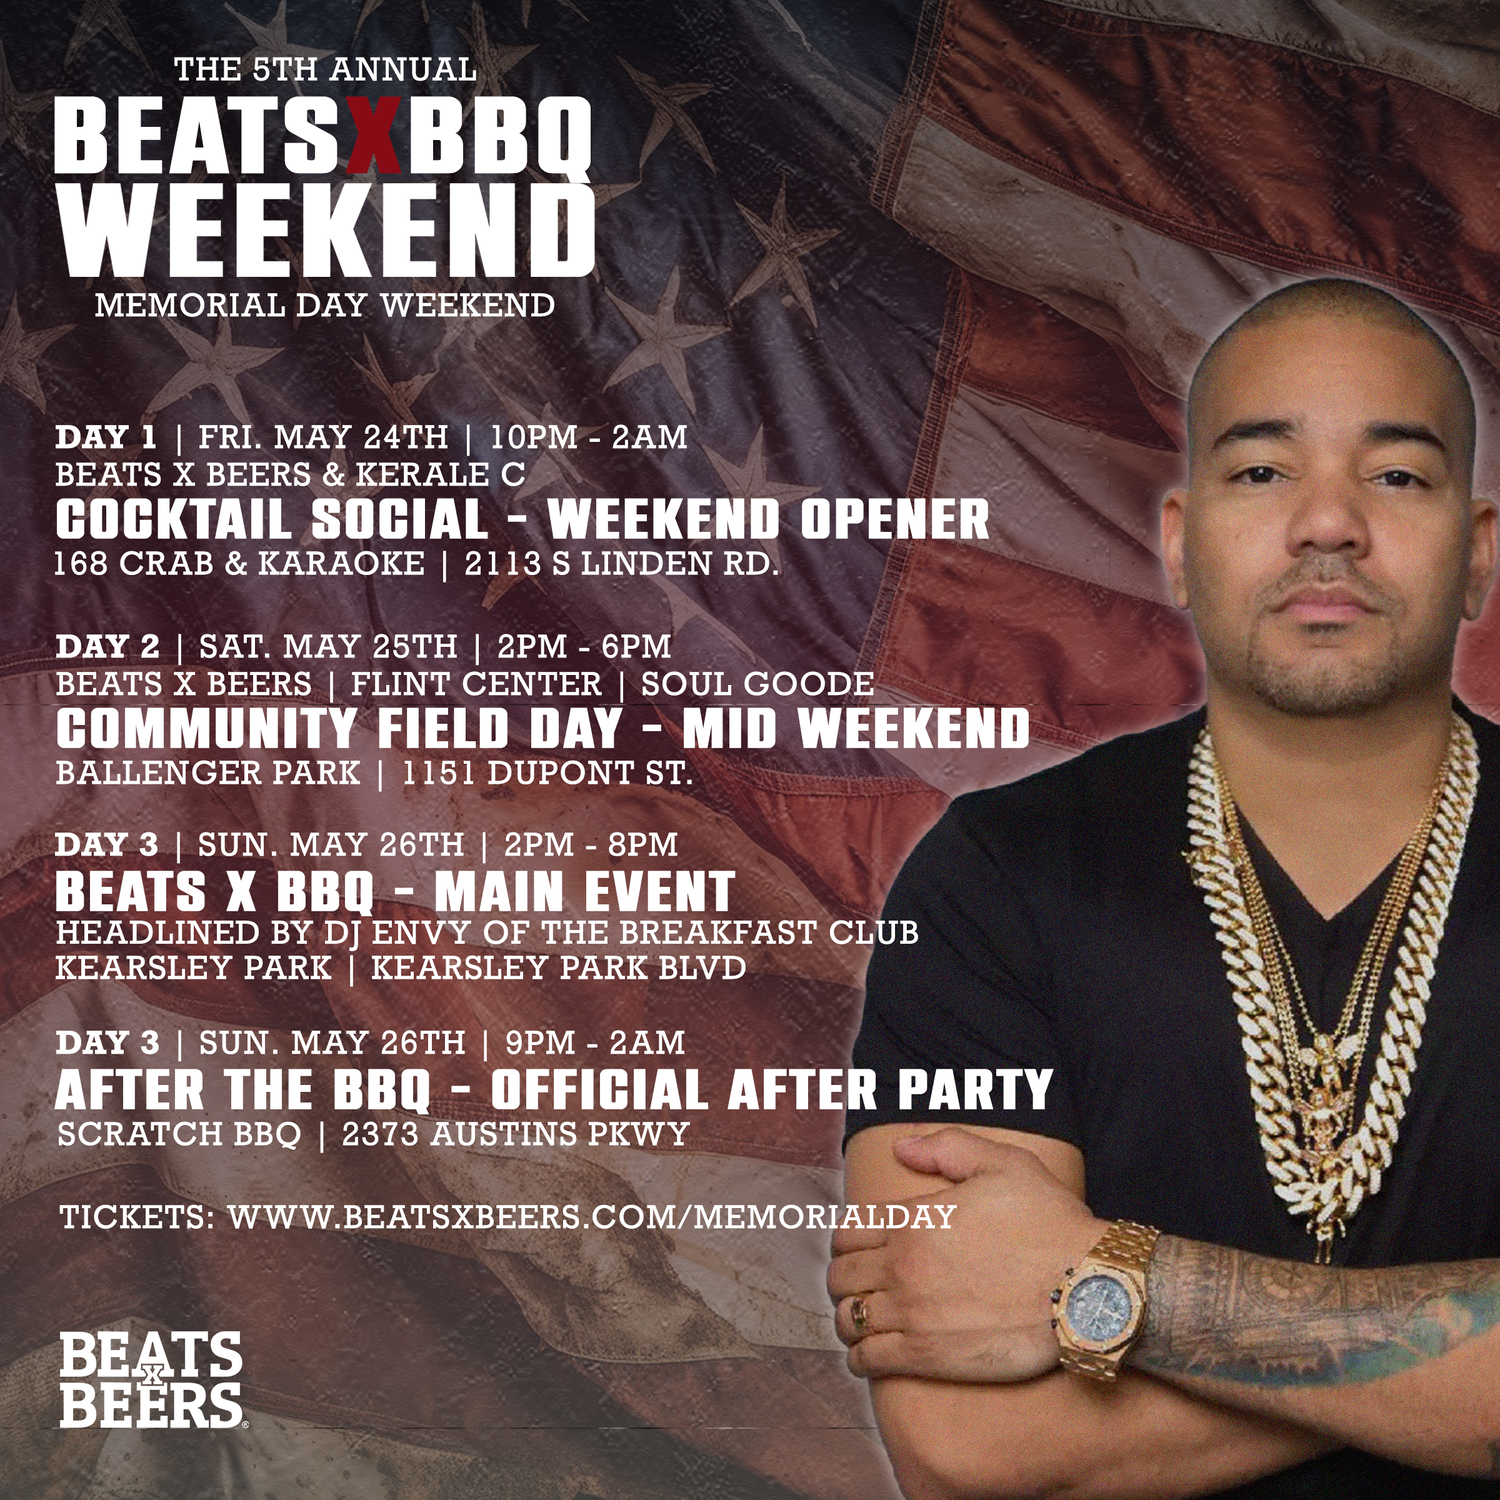 Promotional flier for the 5th annual Beats x BBQ Memorial Day weekend.